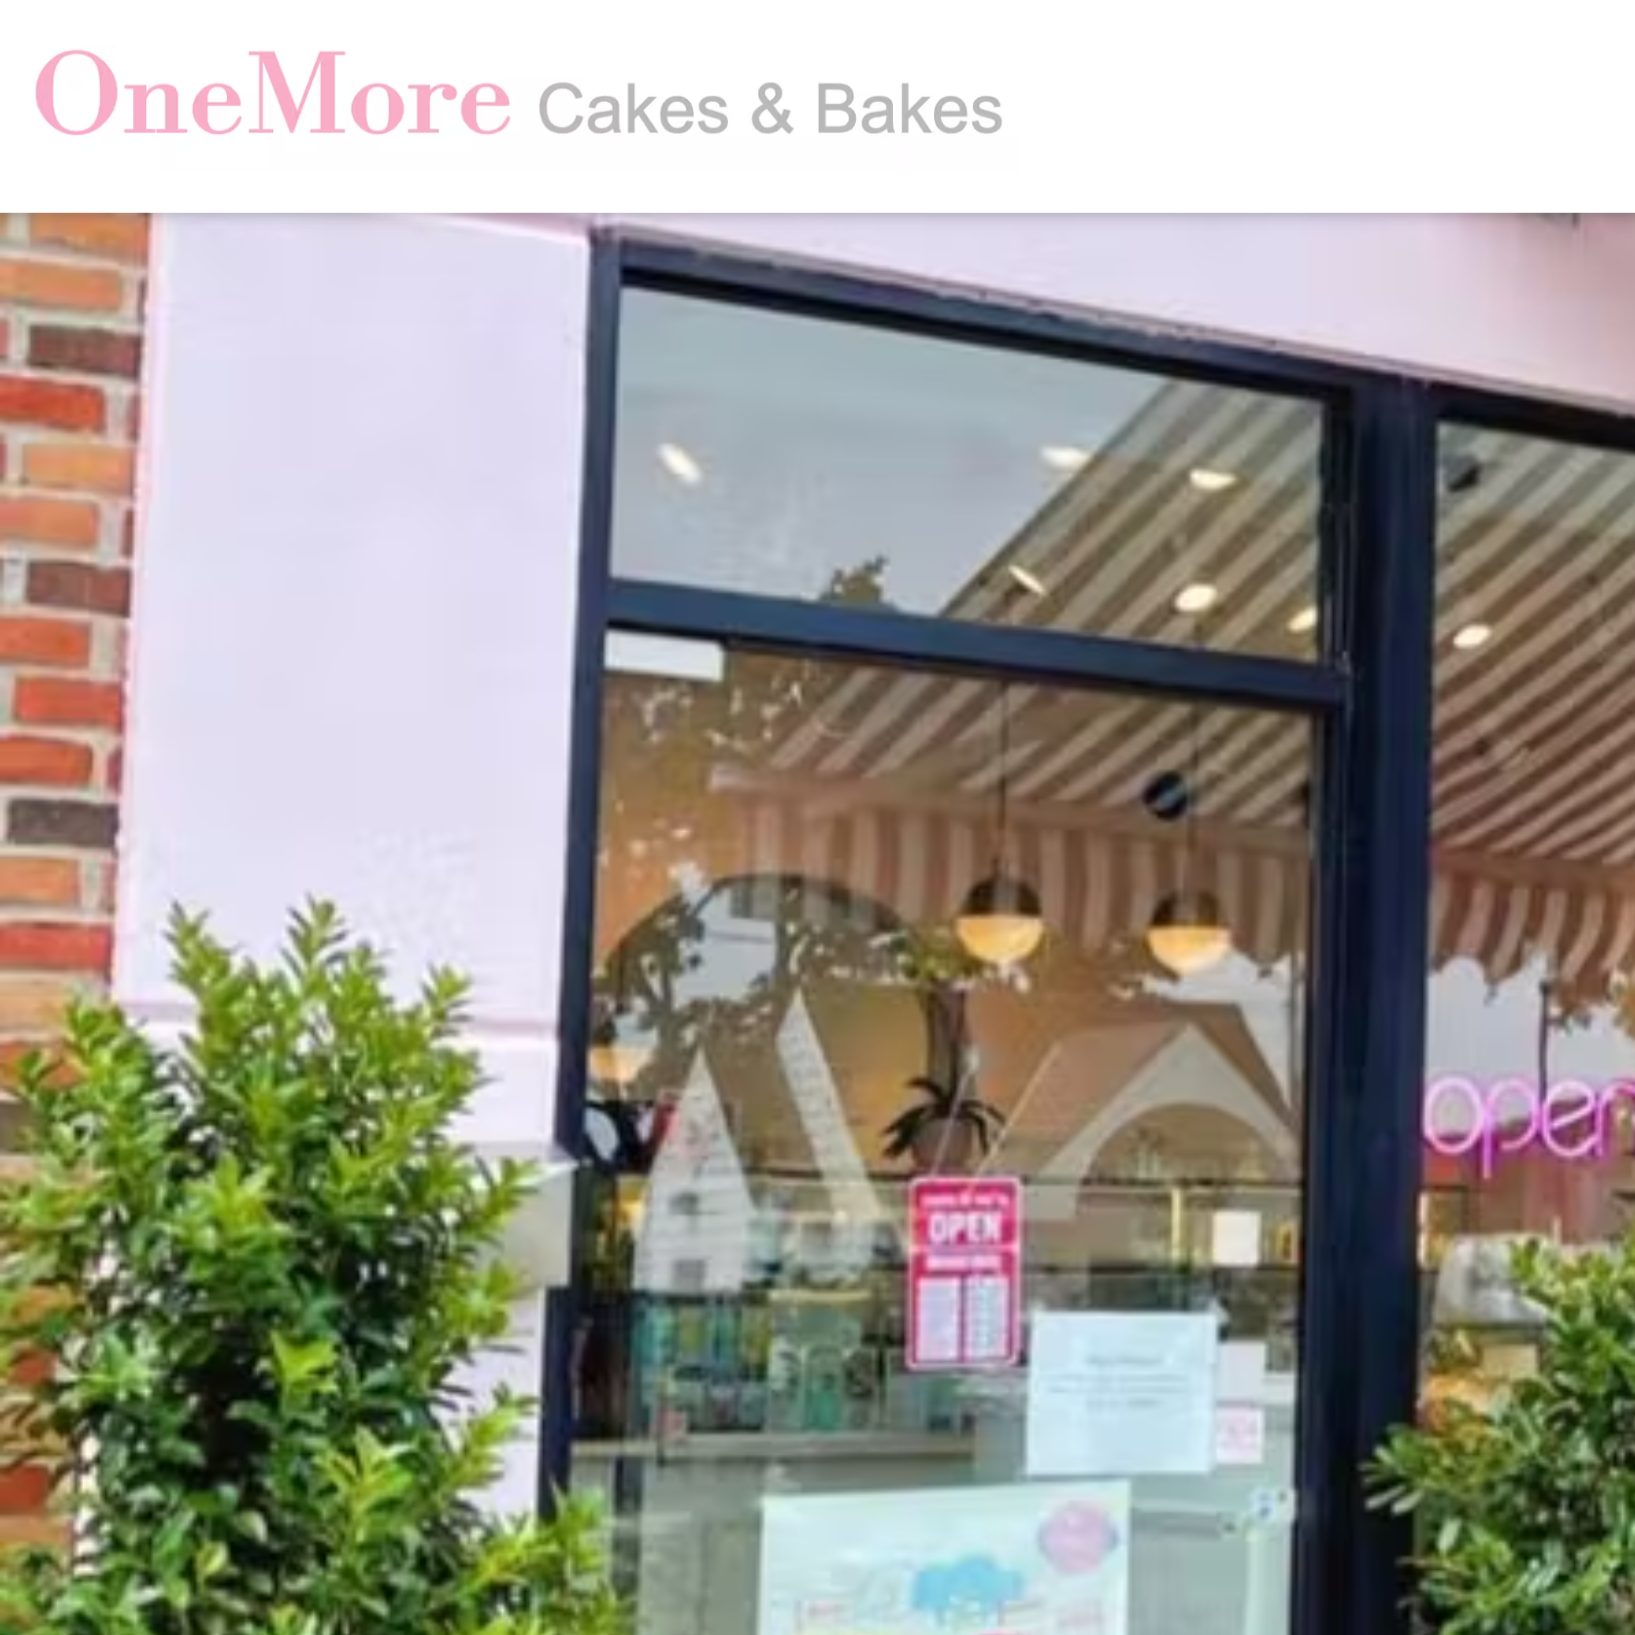 OneMore Cakes & Bakes